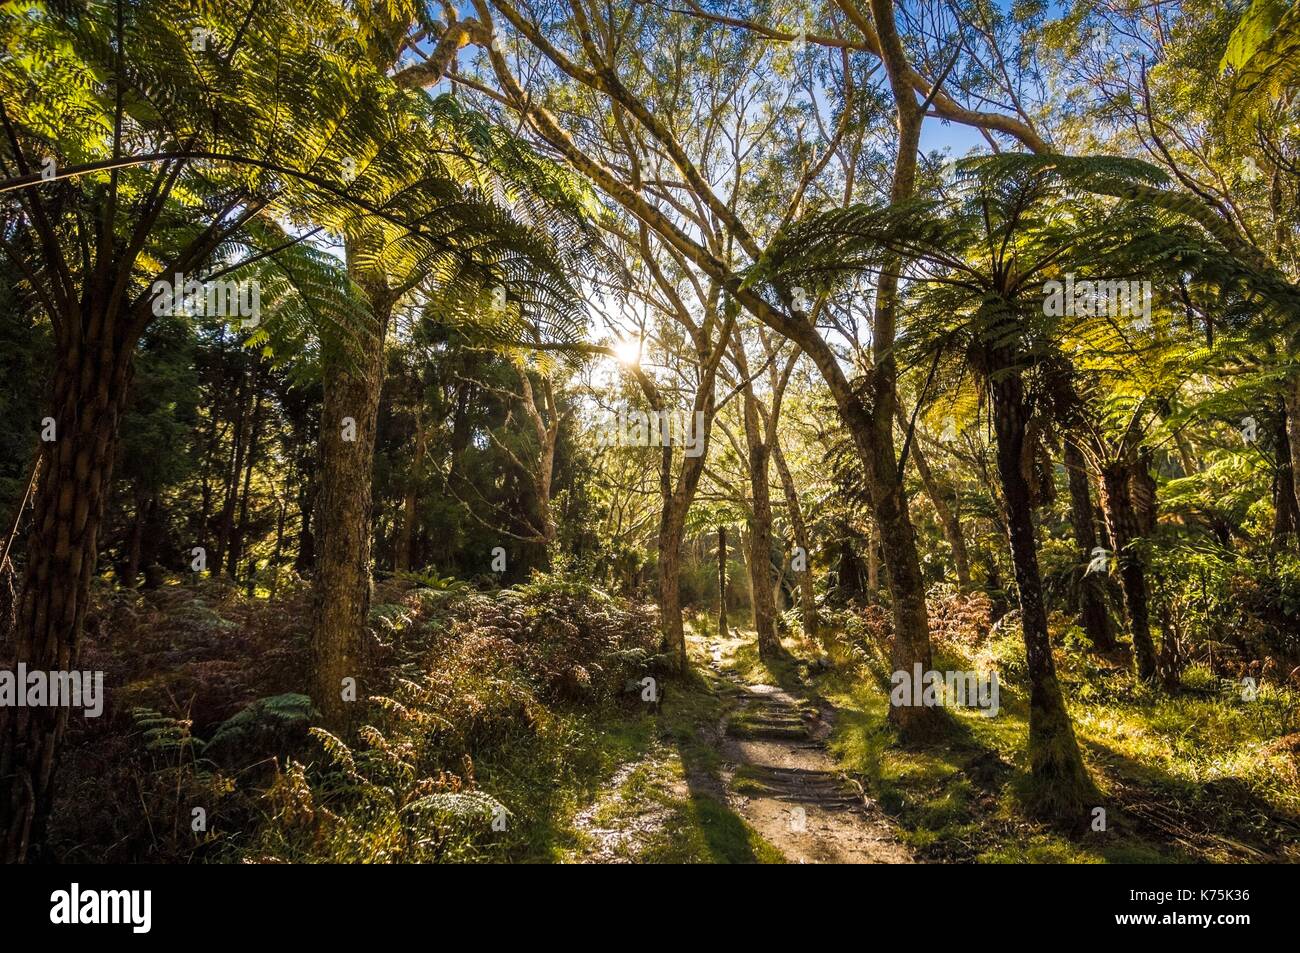 France, Reunion Island, National Park, listed as World Heritage by UNESCO, Salazie's natura circus, tree ferns on the Trou de Fer trail in the Tamarind forest of BŽlouve Stock Photo